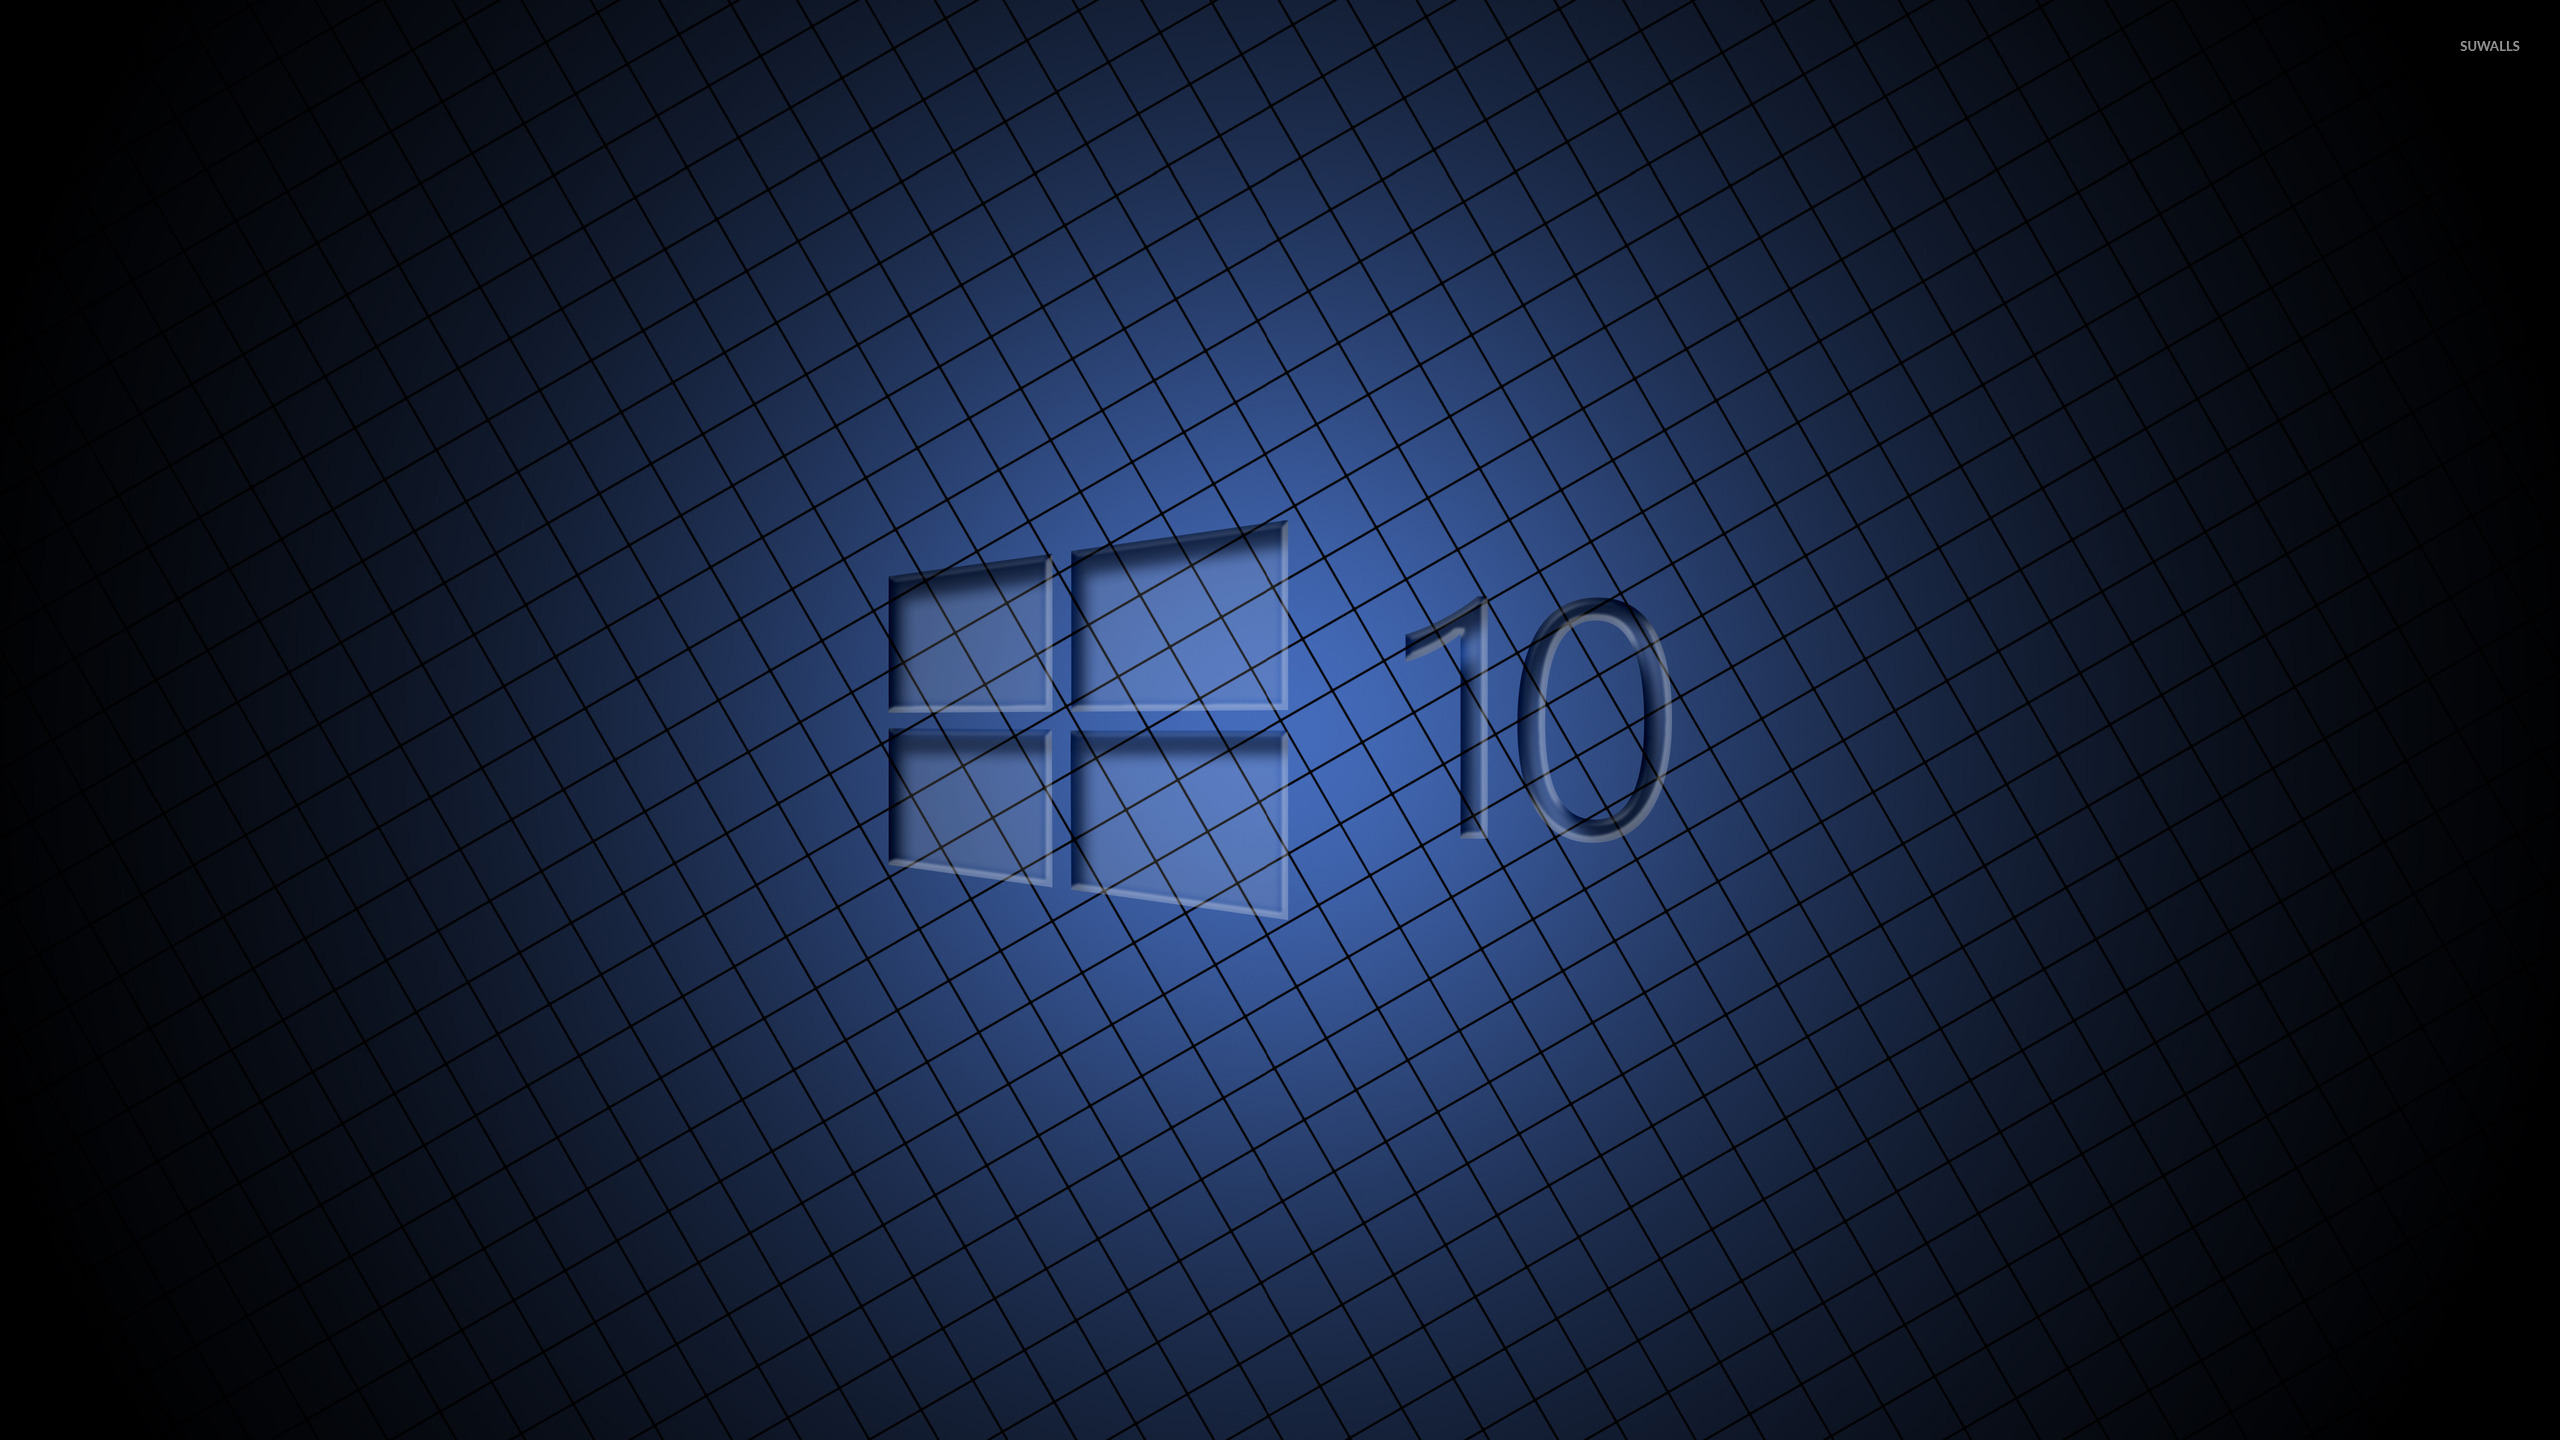 Glass Windows 10 on a blue grid wallpaper - Computer wallpapers - #46556